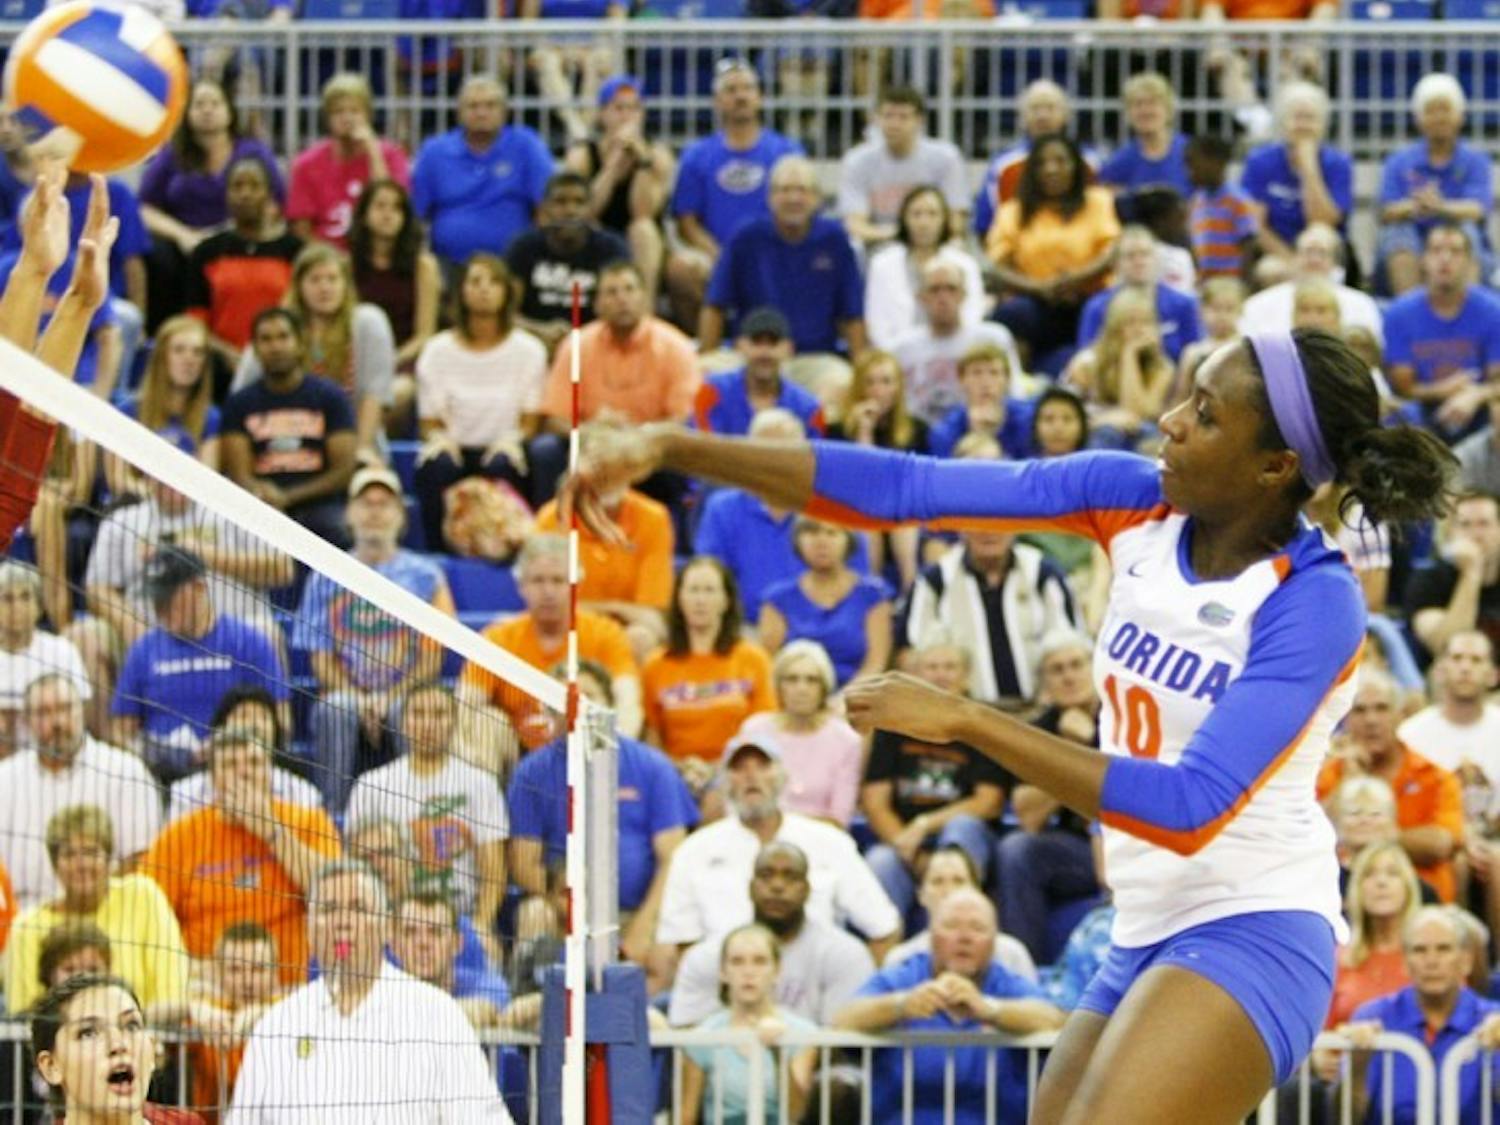 Junior middle blocker Chloe Mann hits the ball over the net in Florida’s 3-0 win against Arkansas on Oct. 5, 2012, in the O’Connell Center.&nbsp;